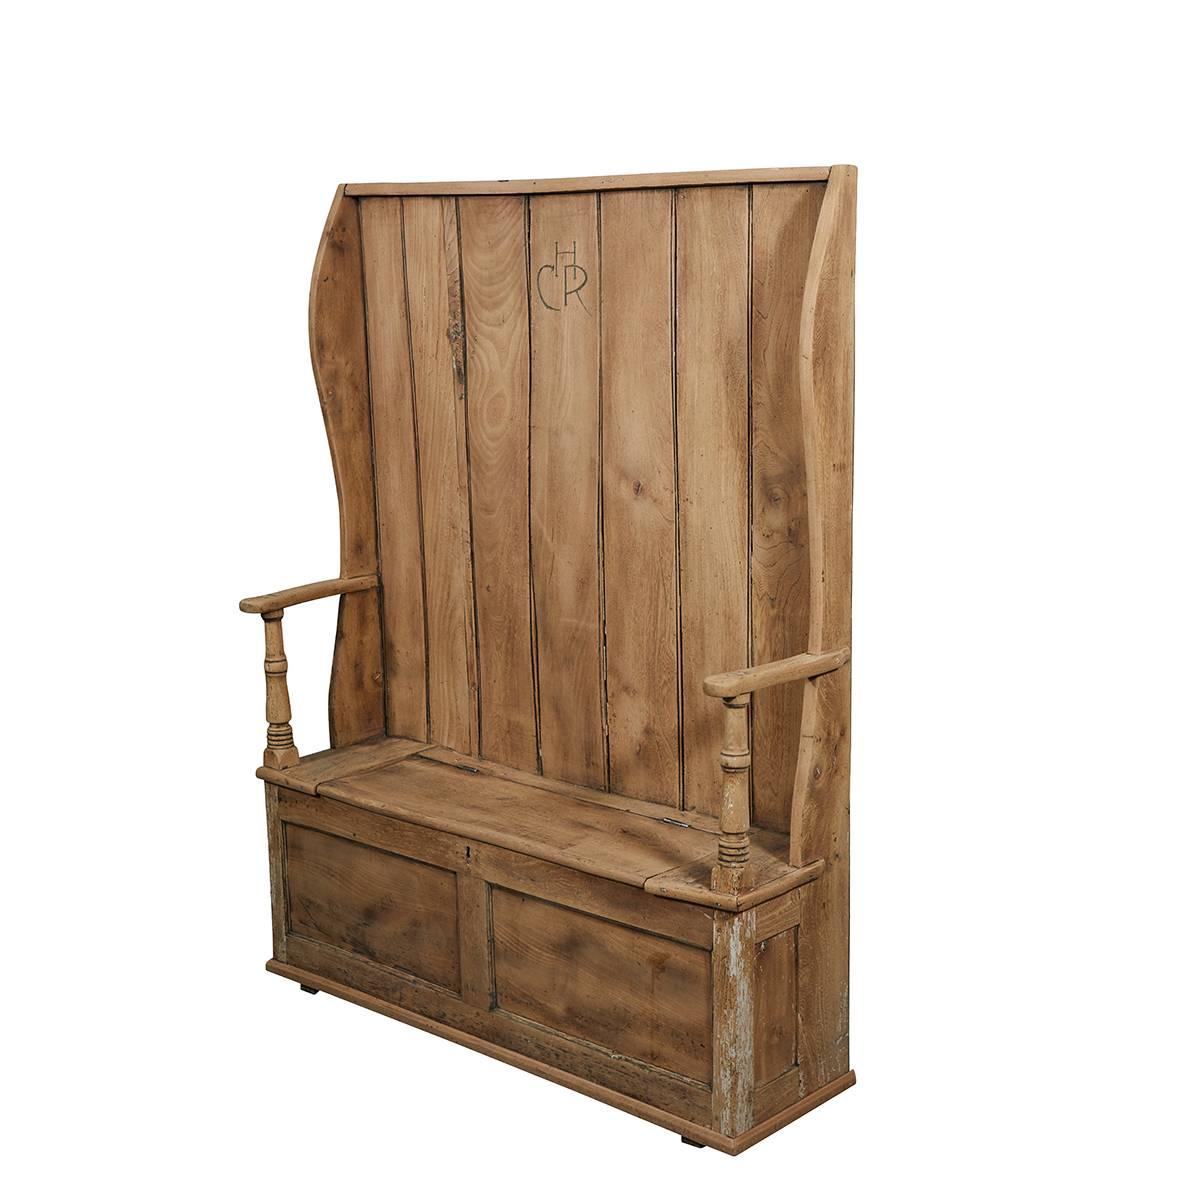 Country English Pine Settle/Bench